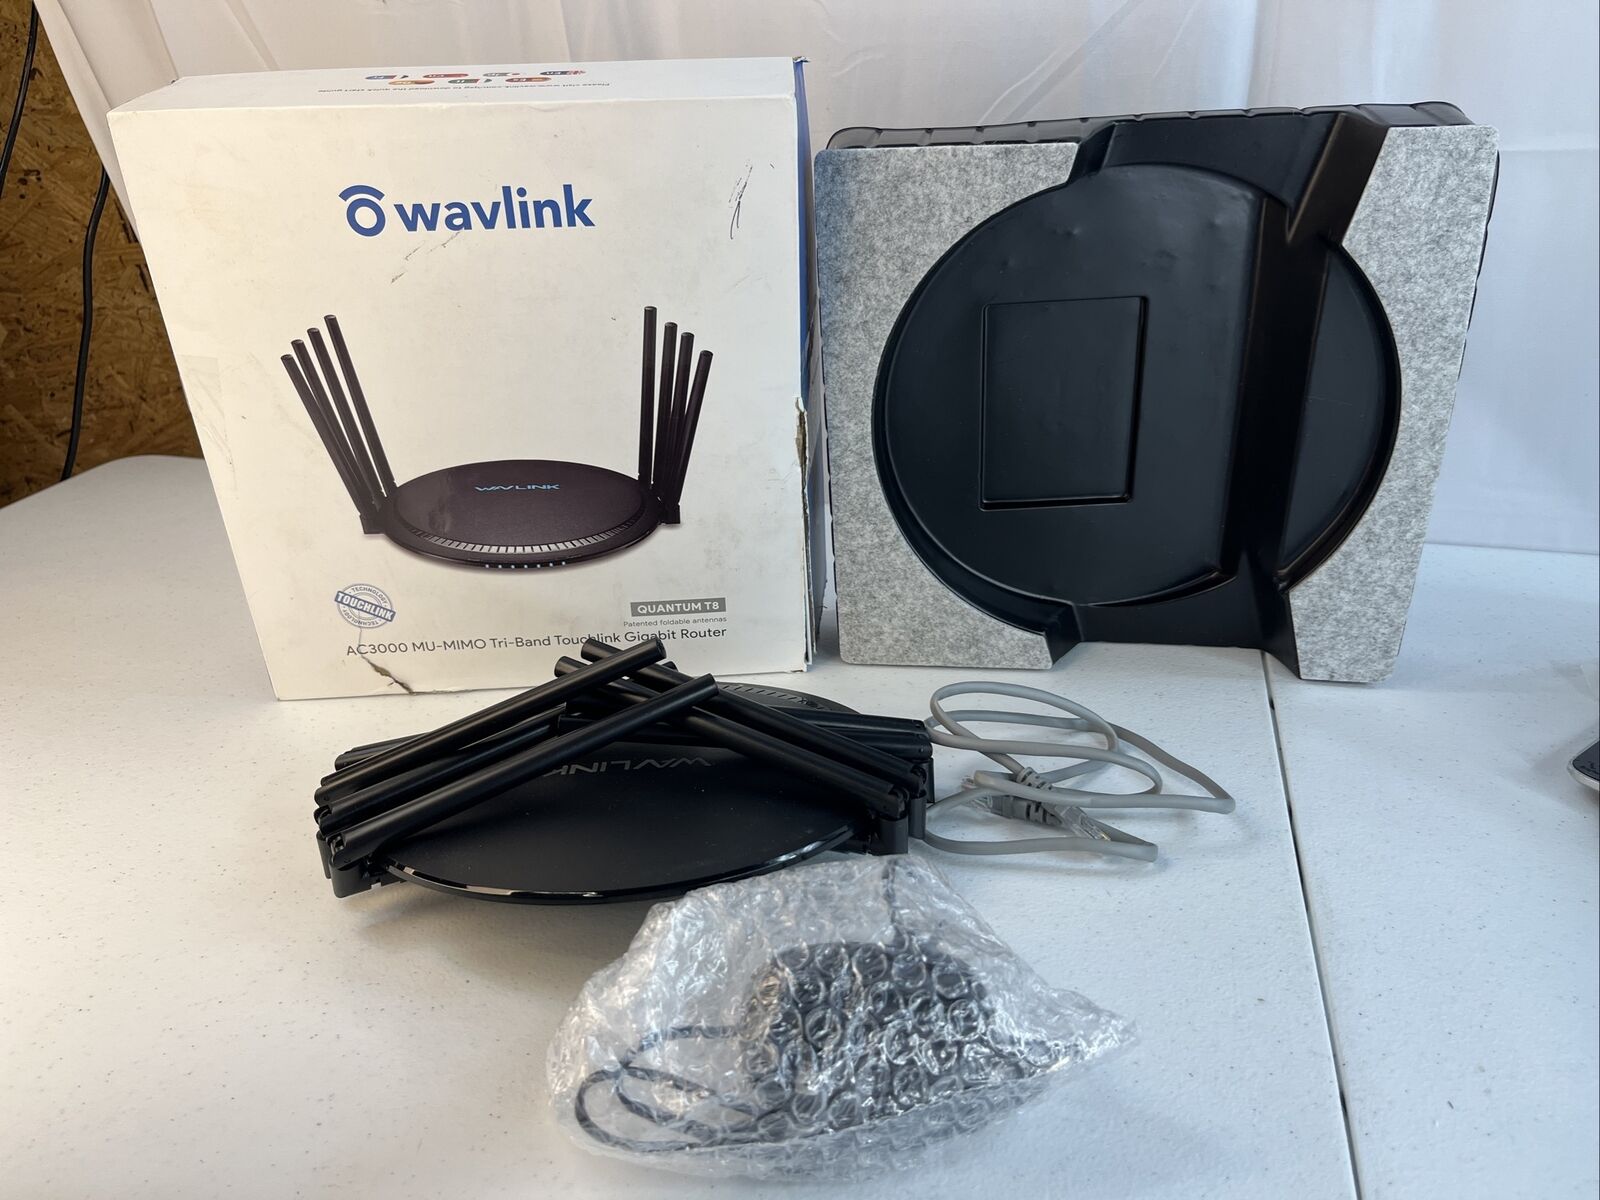 AC3000 Tri-Band Wireless Internet Router Supports Router/Bridge/WISP Mode